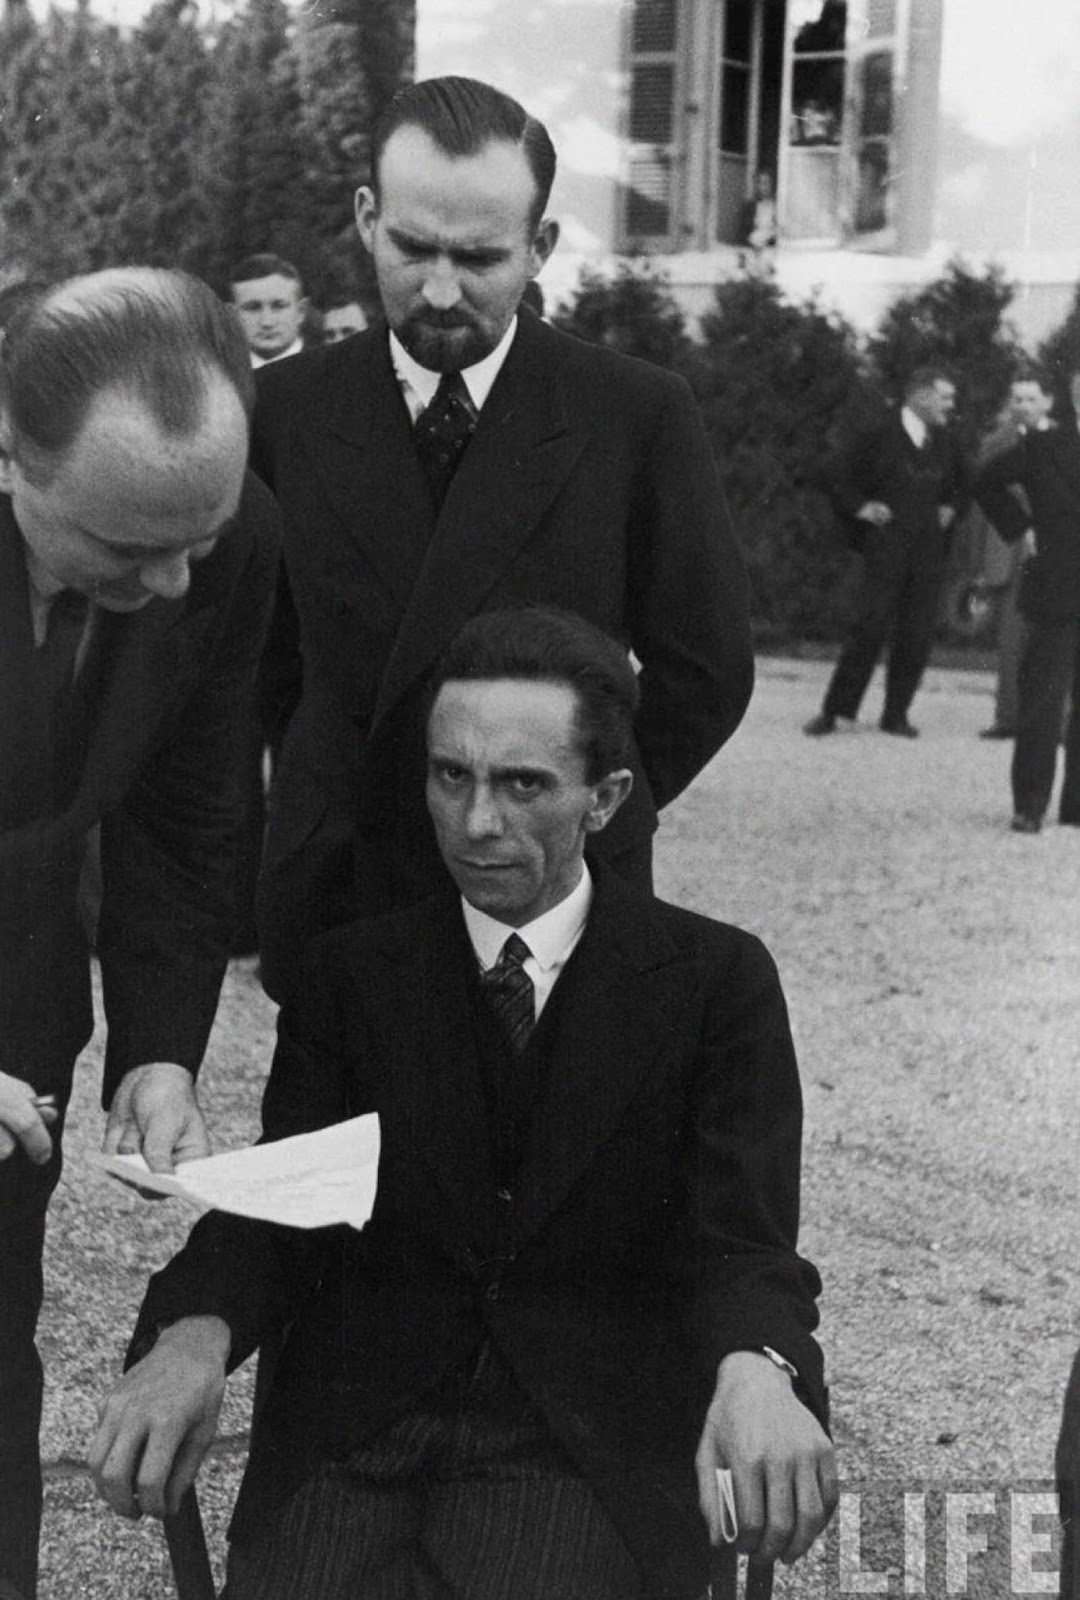 Eyes of Hate: The Shocking Story of Goebbels' Hatred Towards a Jewish Photographer